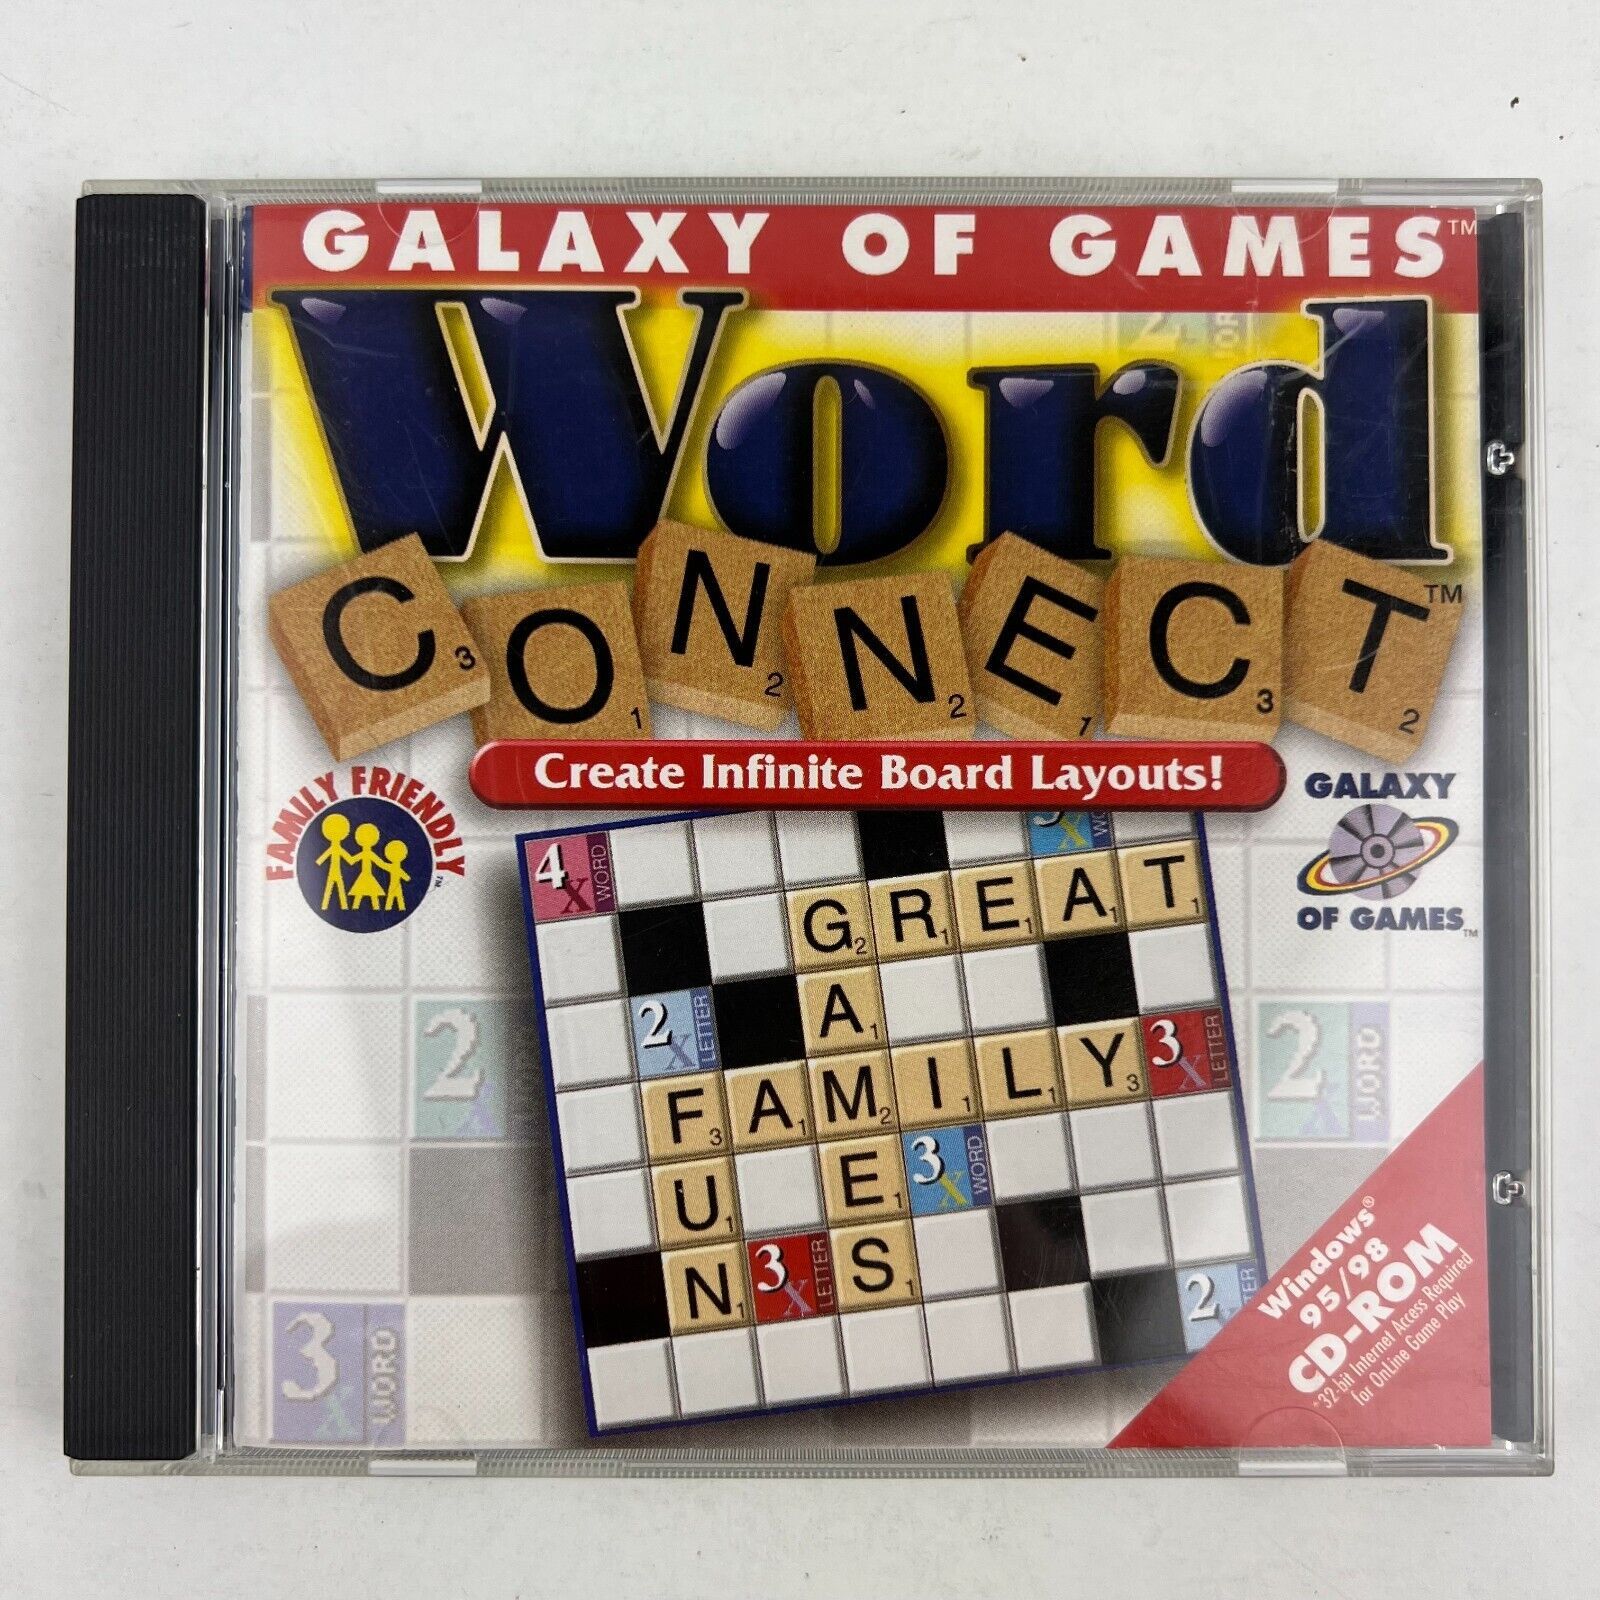 Primary image for Word Connect Galaxy Of Games PC CD-ROM Game Software